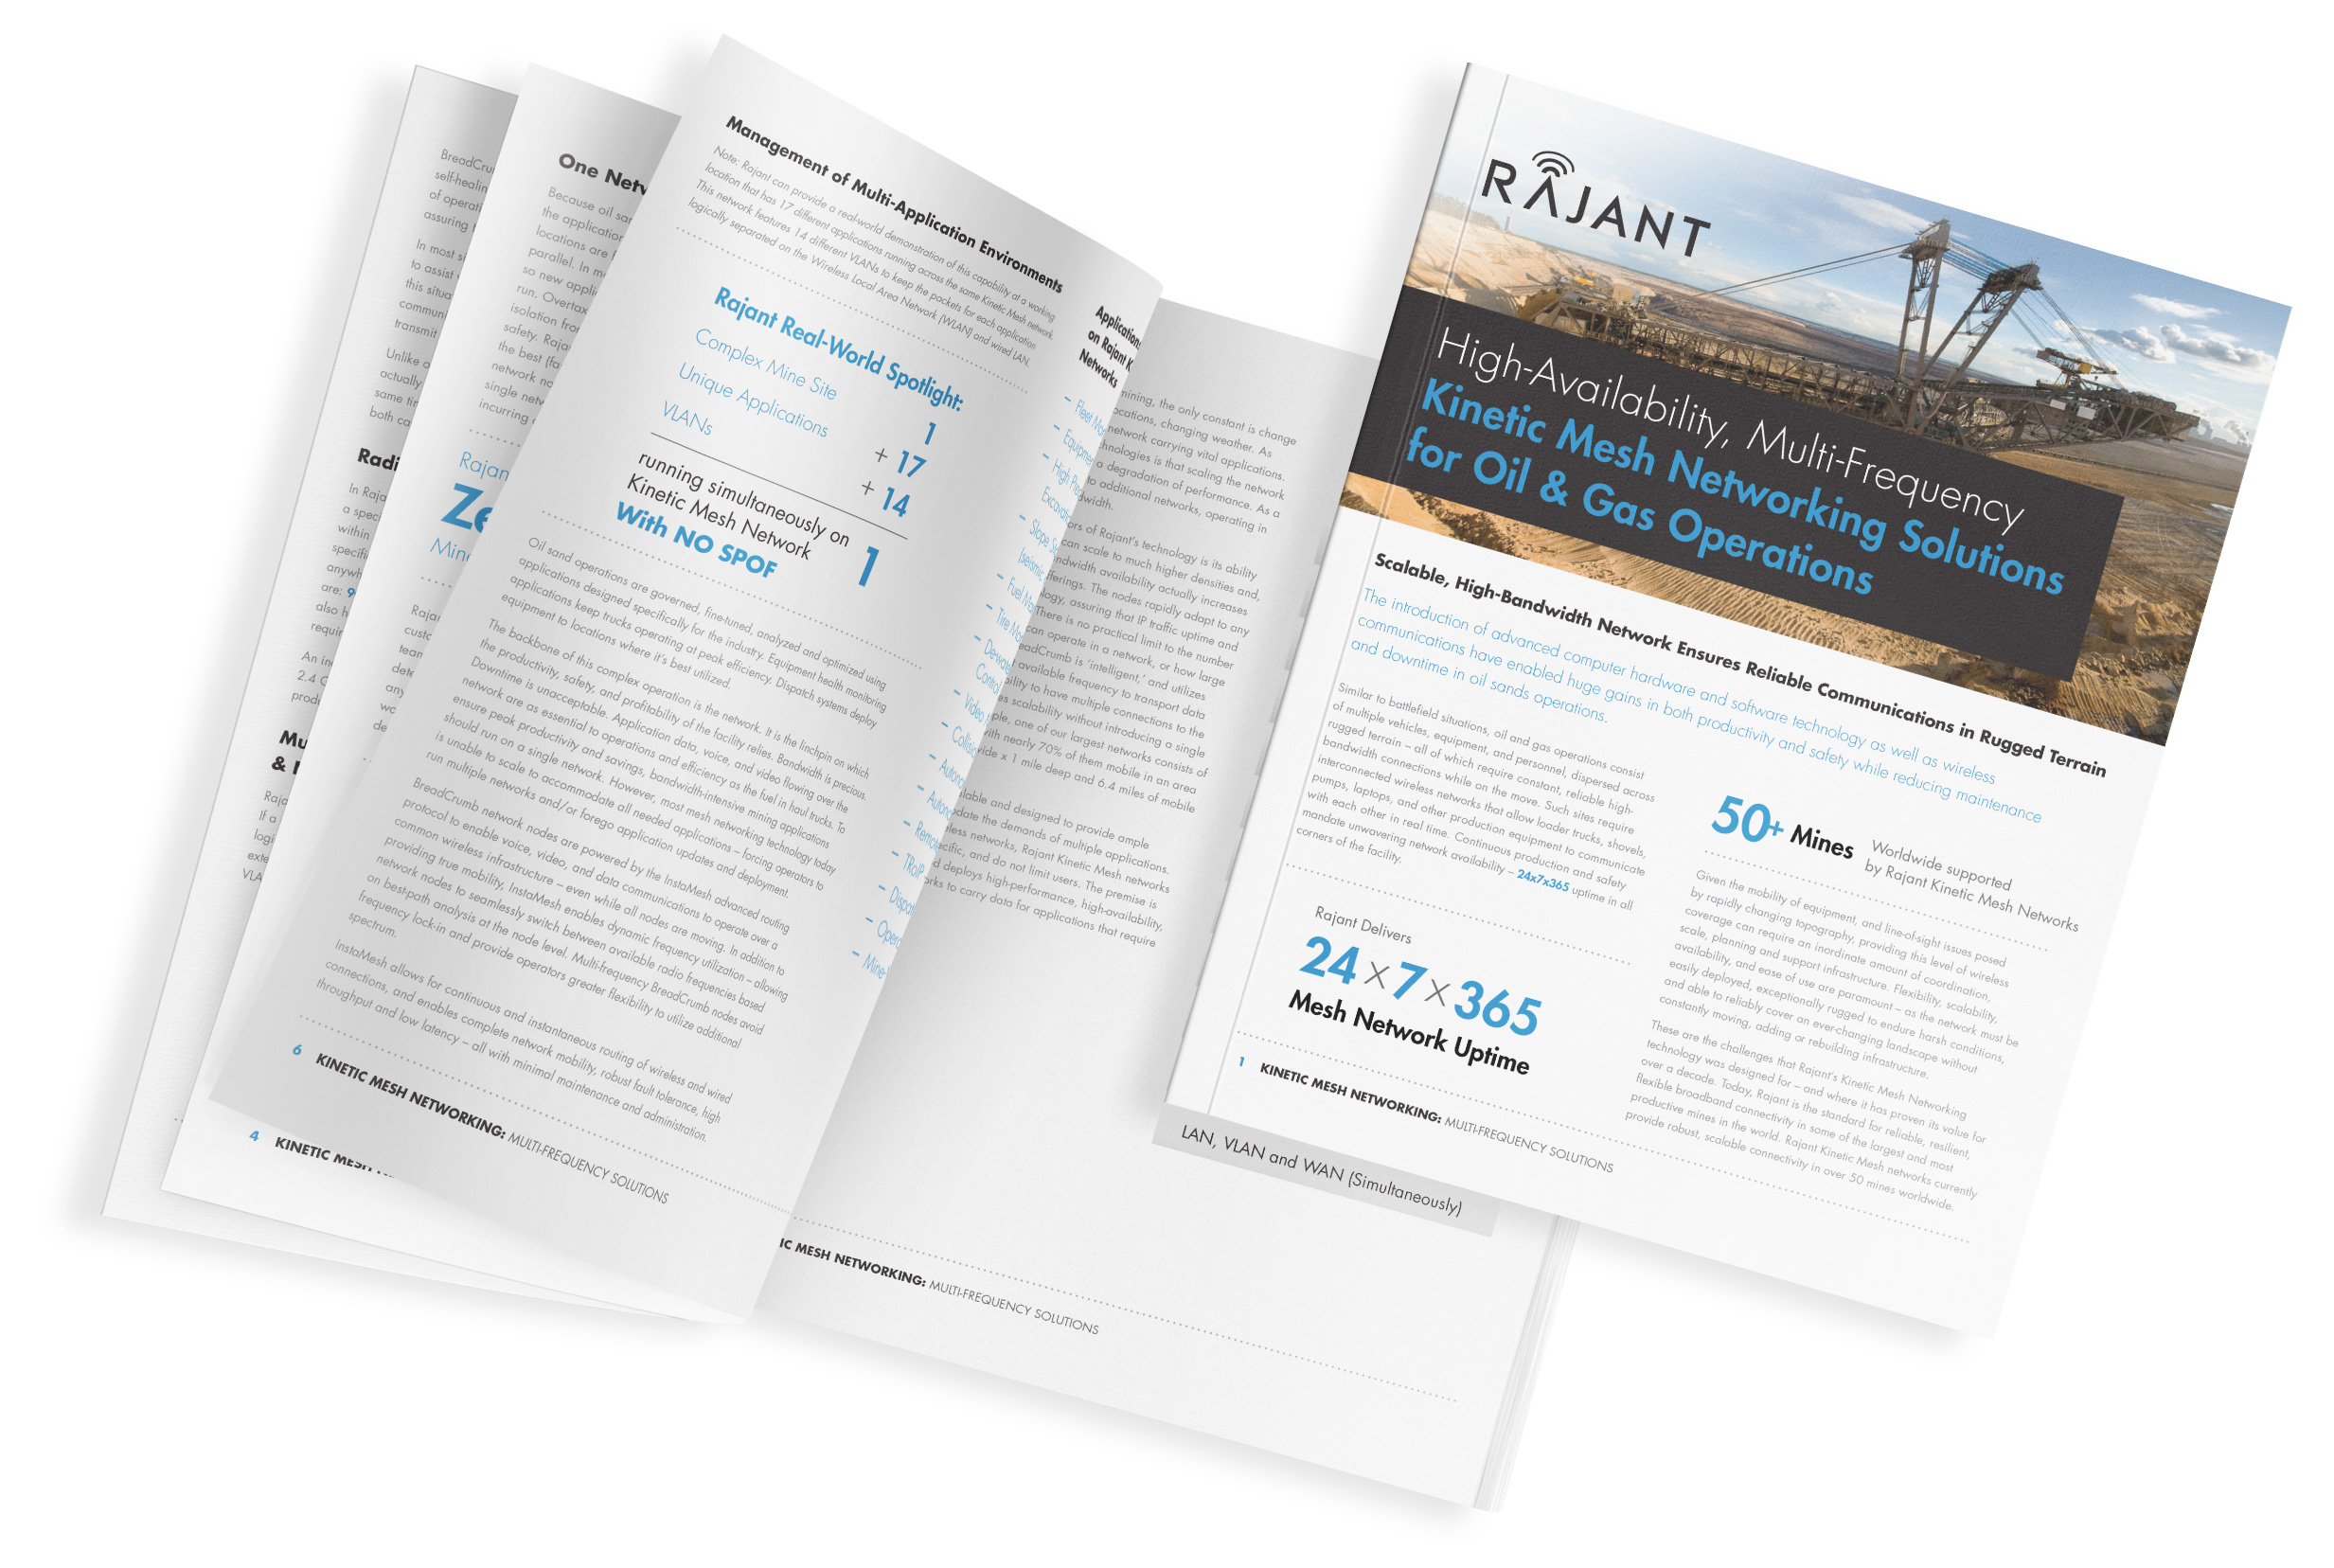 Whitepaper Kinetic Mesh Networking Solutions for Oil & Gas